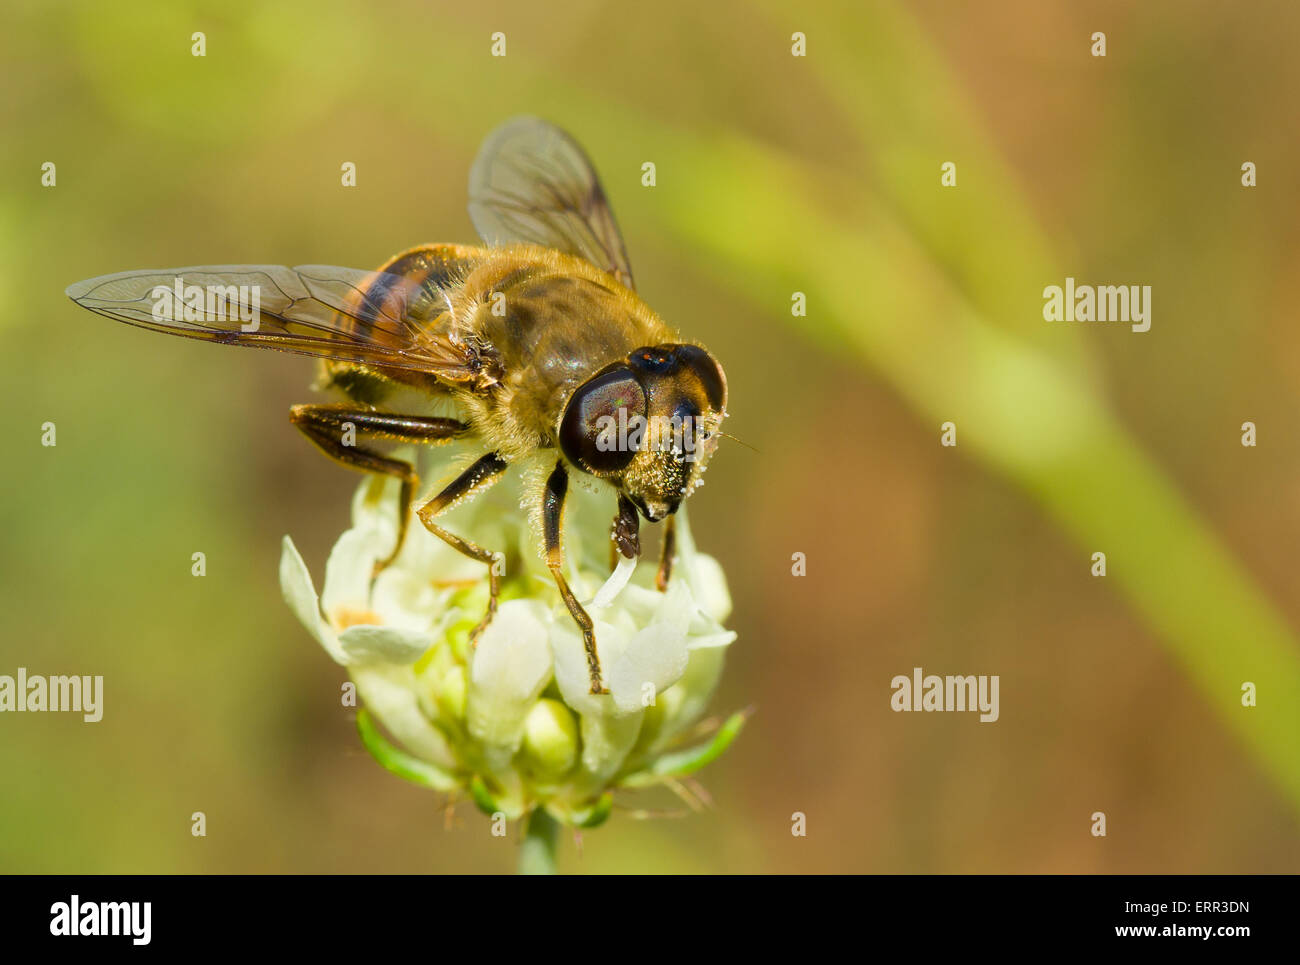 Species of fly similar to bee getting nectar from the summer flower. Stock Photo